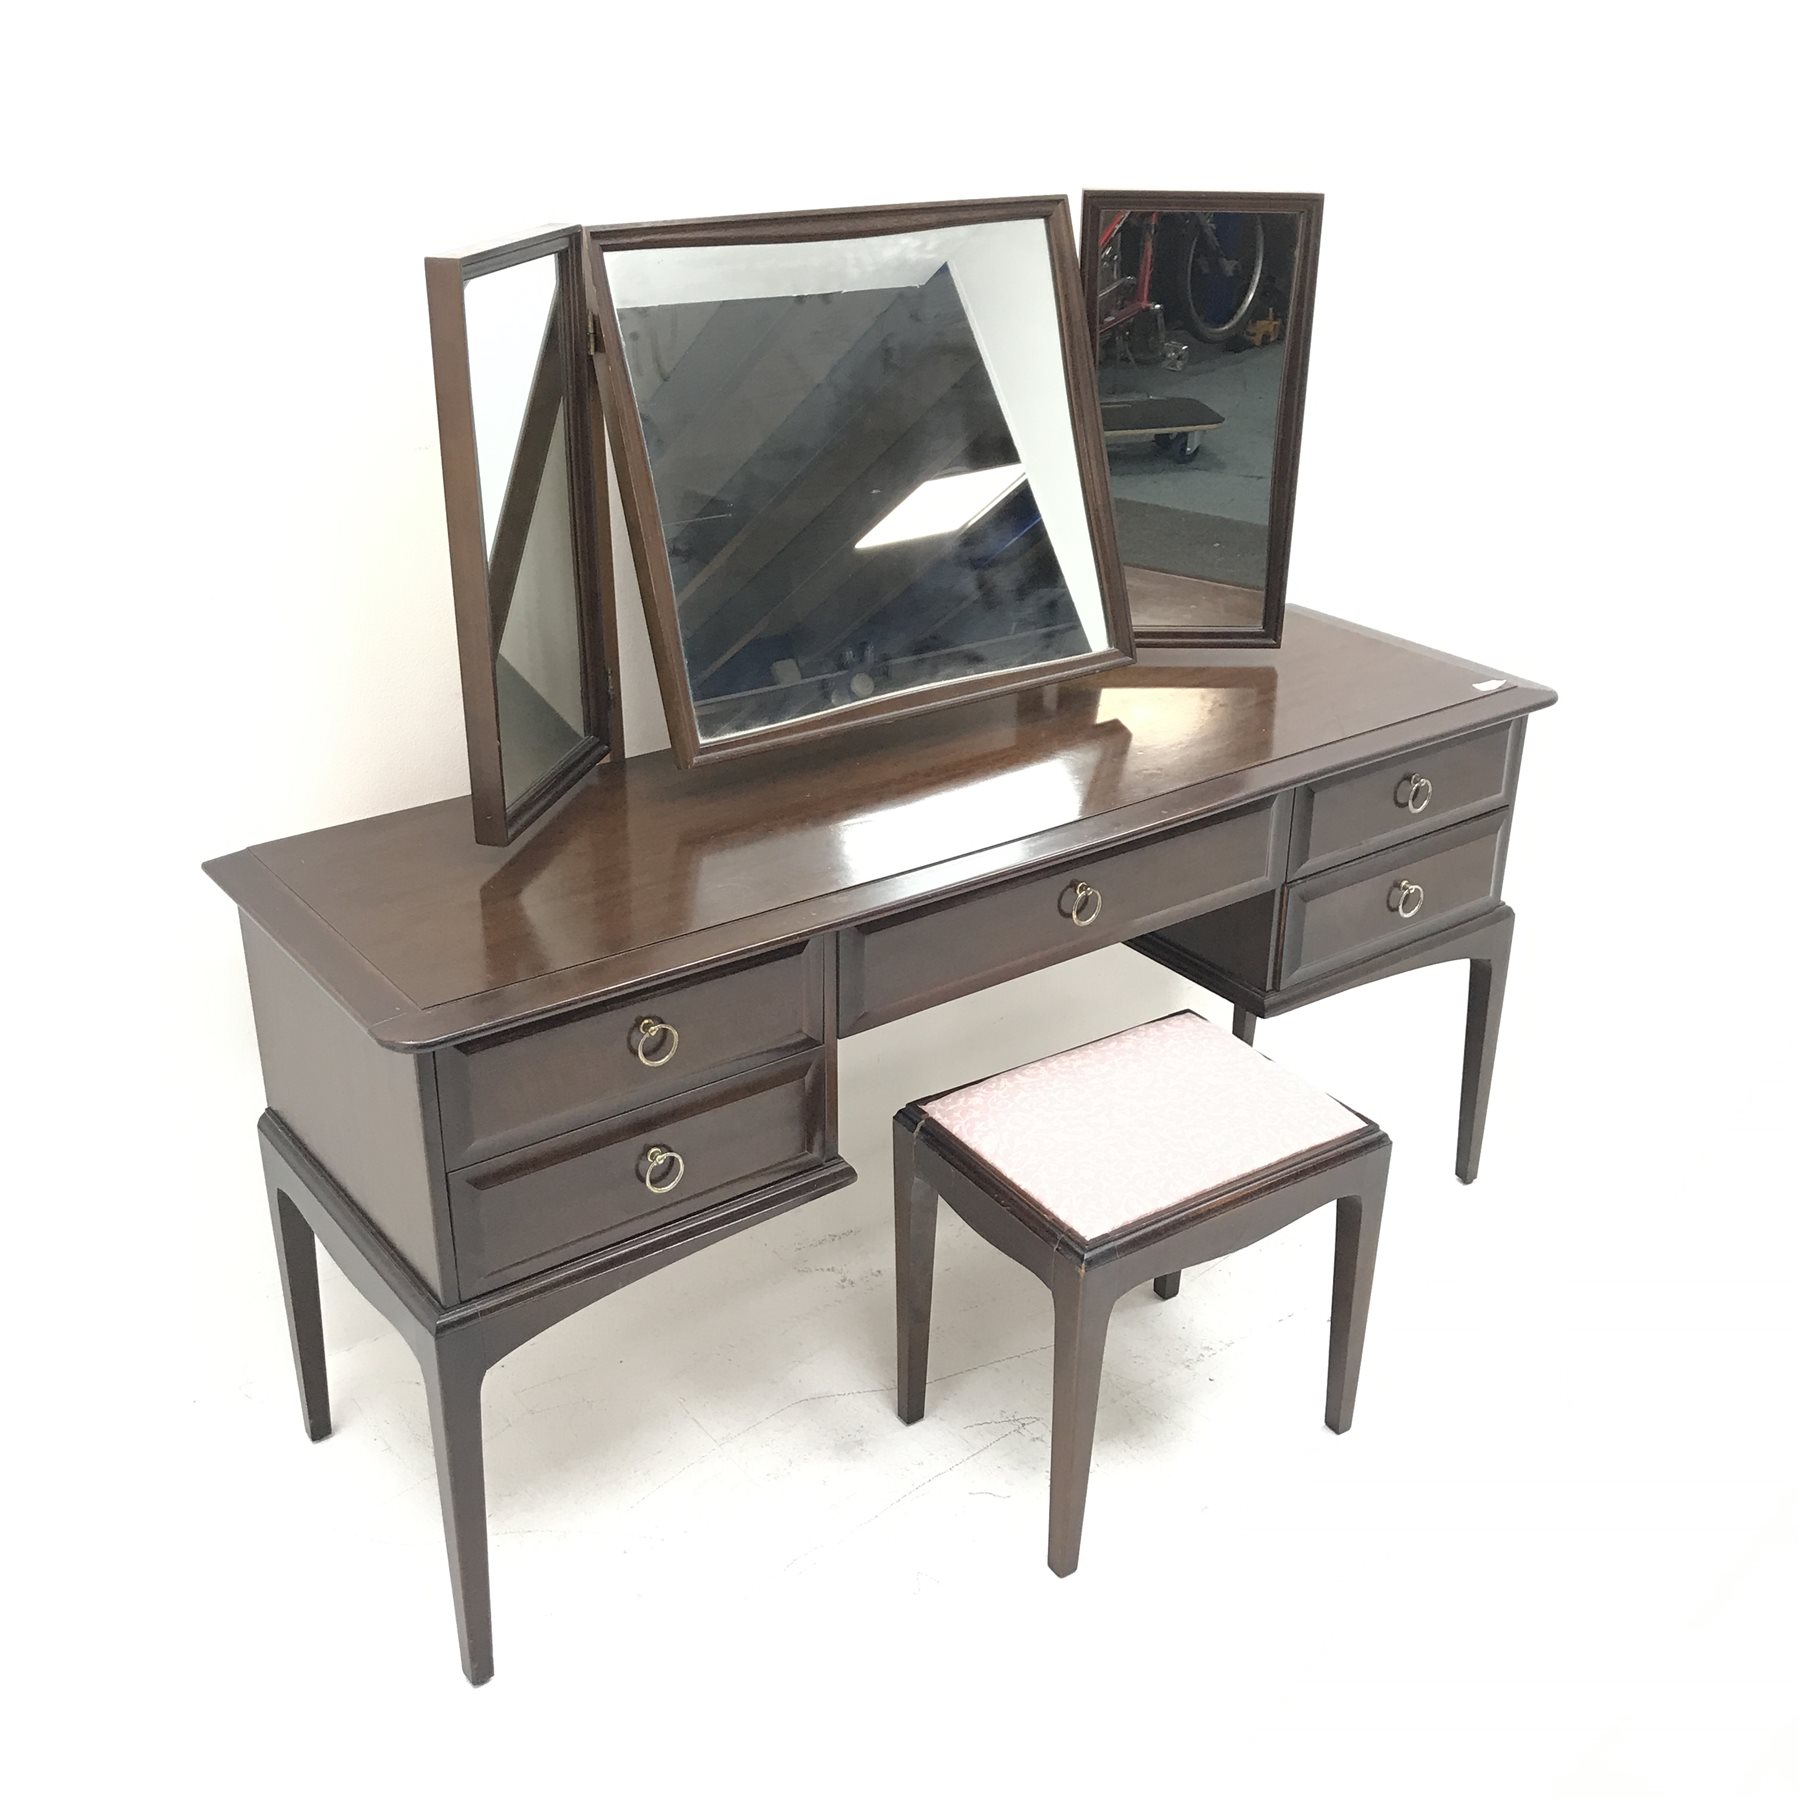 Stag mahogany dressing table, raised three piece mirror back, five drawers, square tapering supports - Image 2 of 3